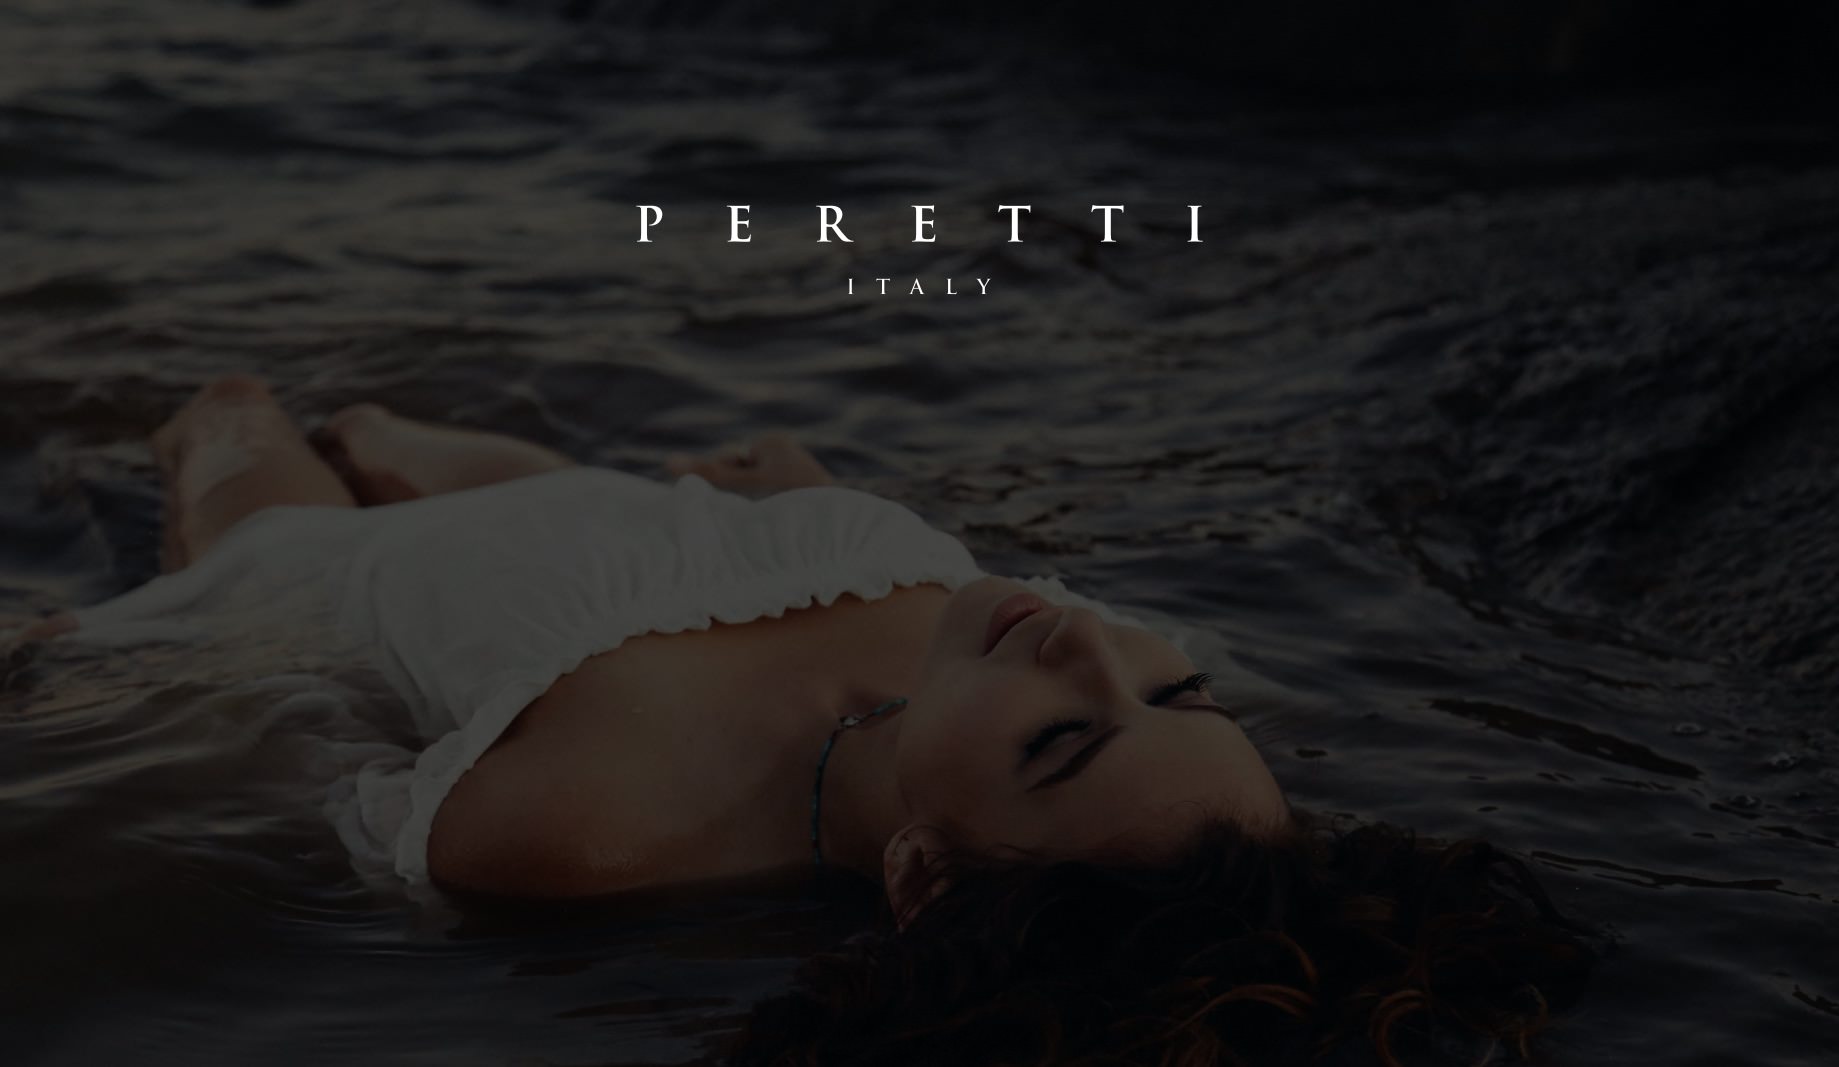 White Peretti Italy title on dimmed background of woman in a white dress laying in the water